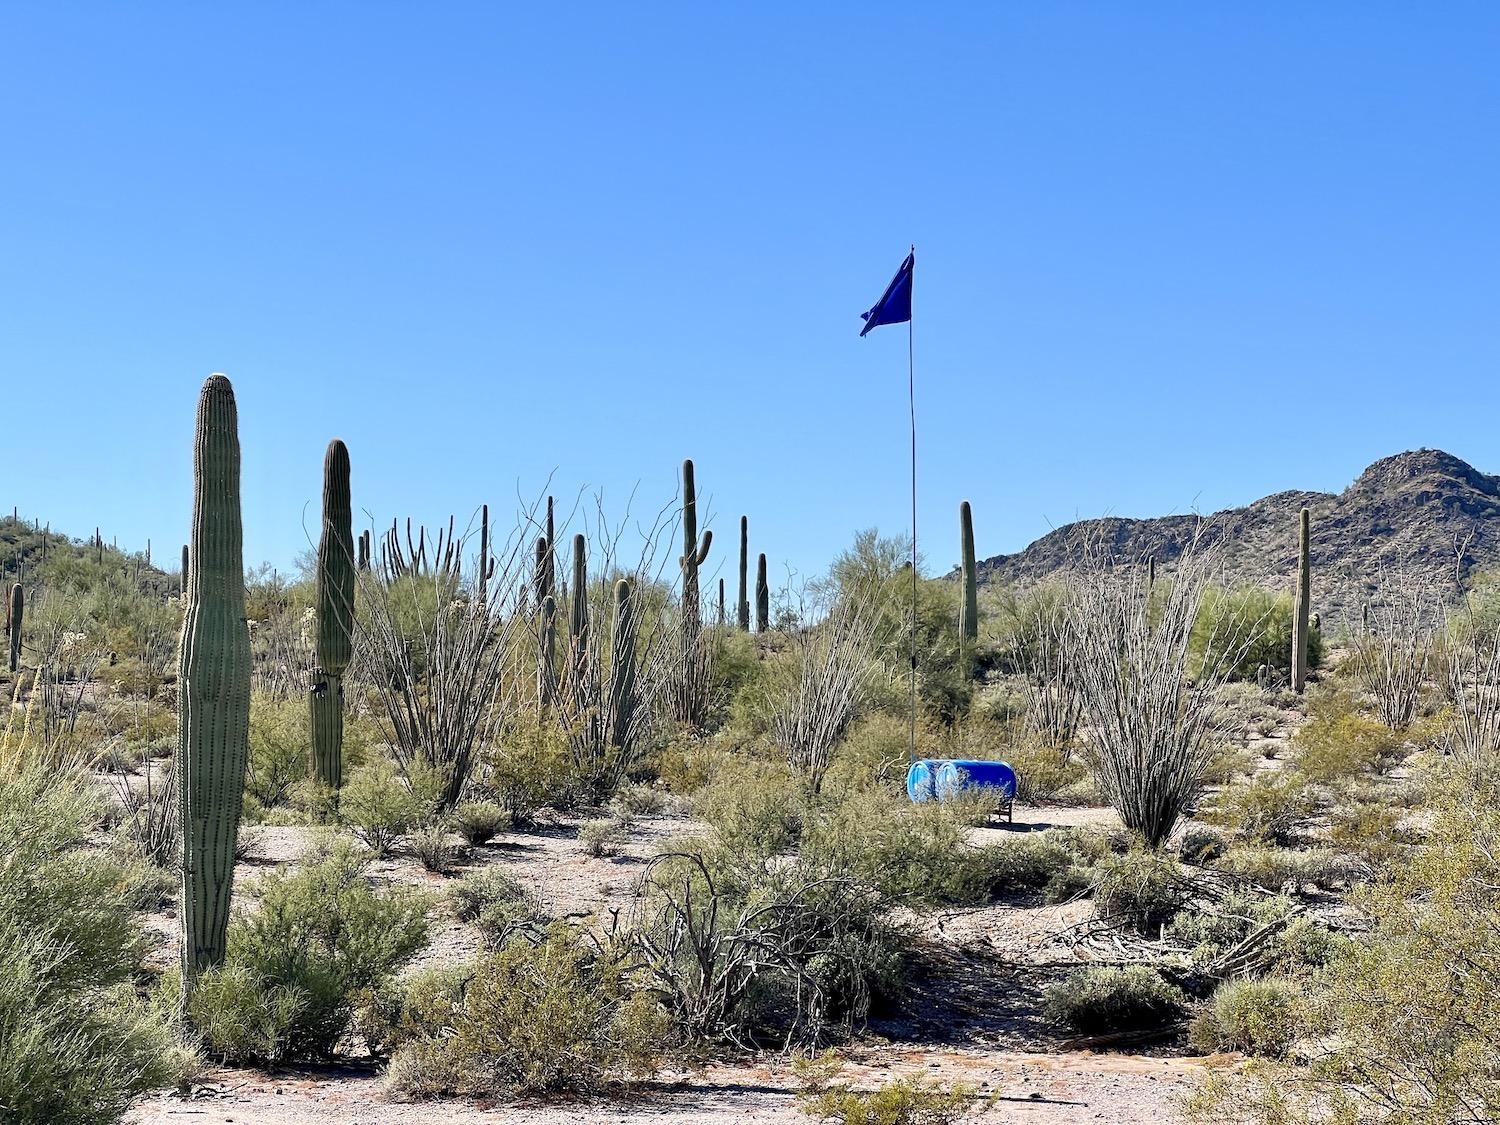 One of the Humane Borders water stations in Organ Pipe Cactus National Monument.